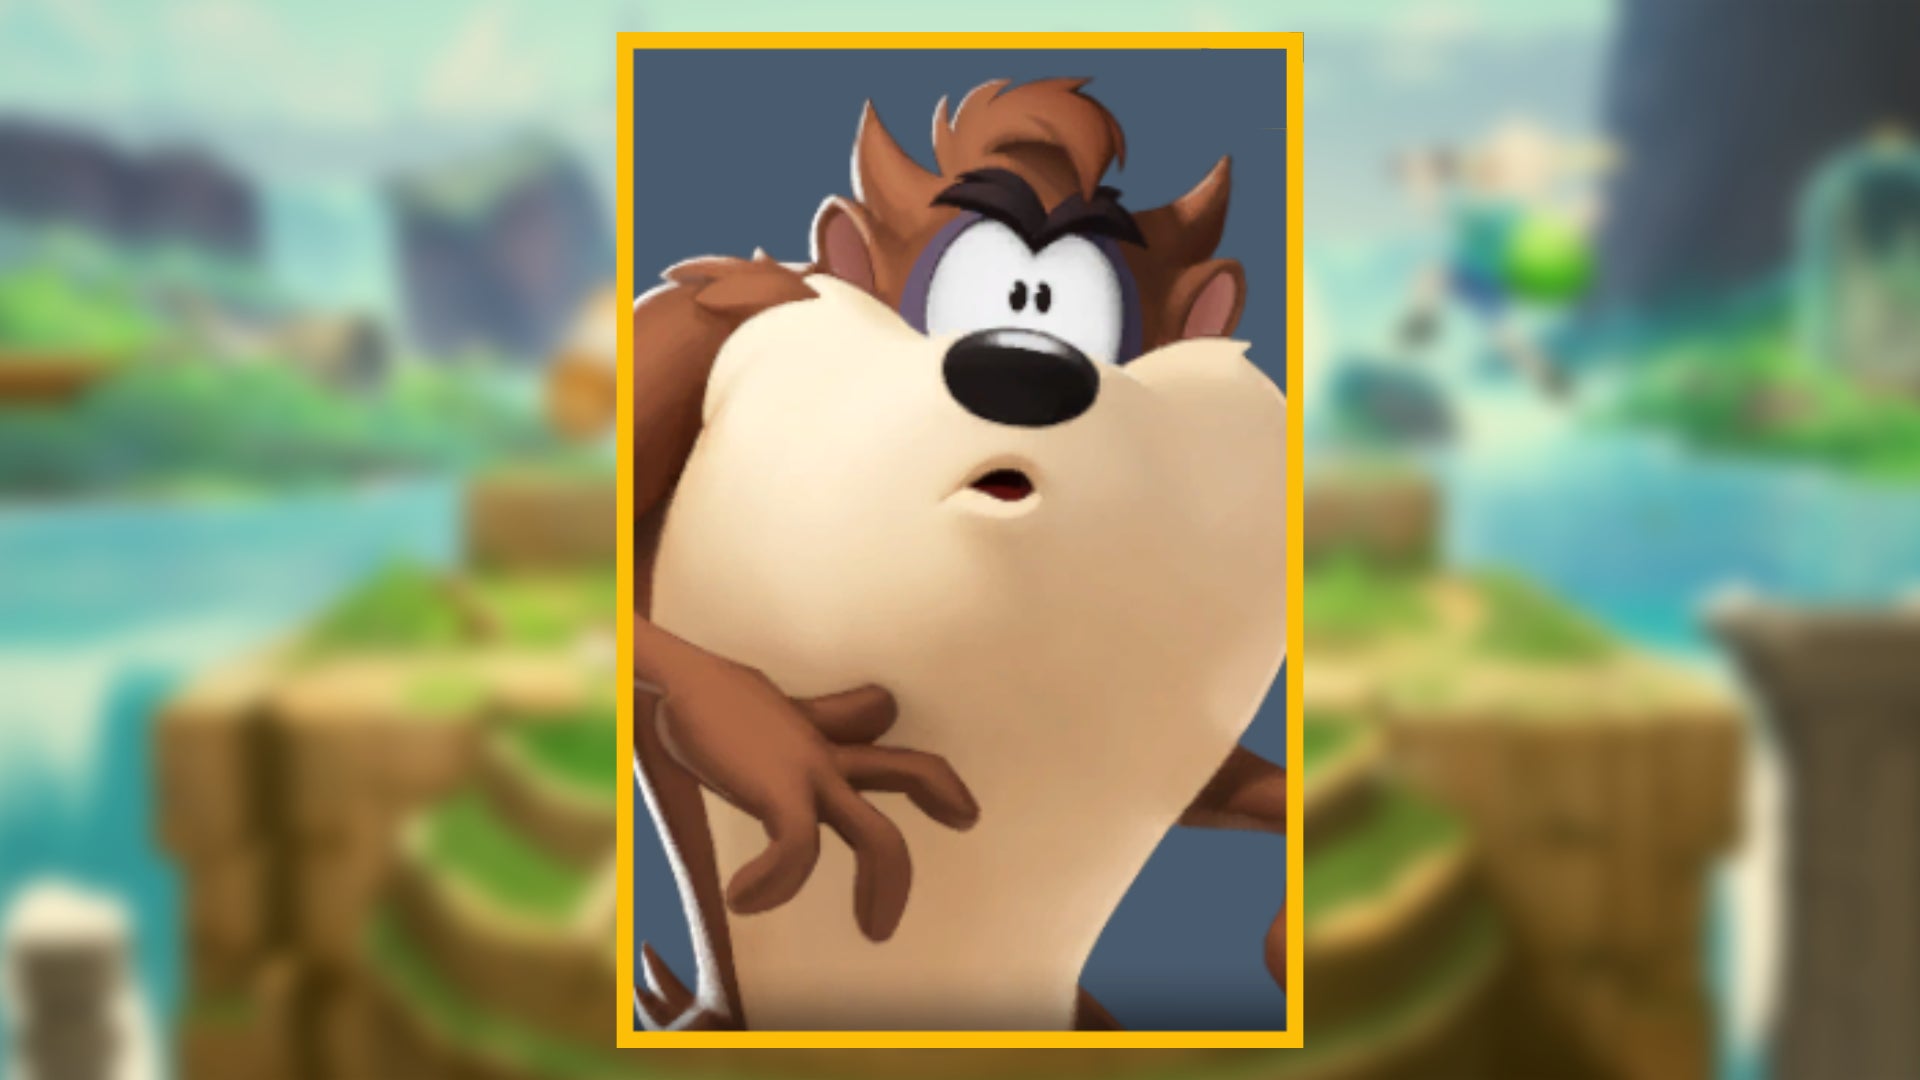 The character portrait of Taz, a playable character in MultiVersus, against a blurred background.